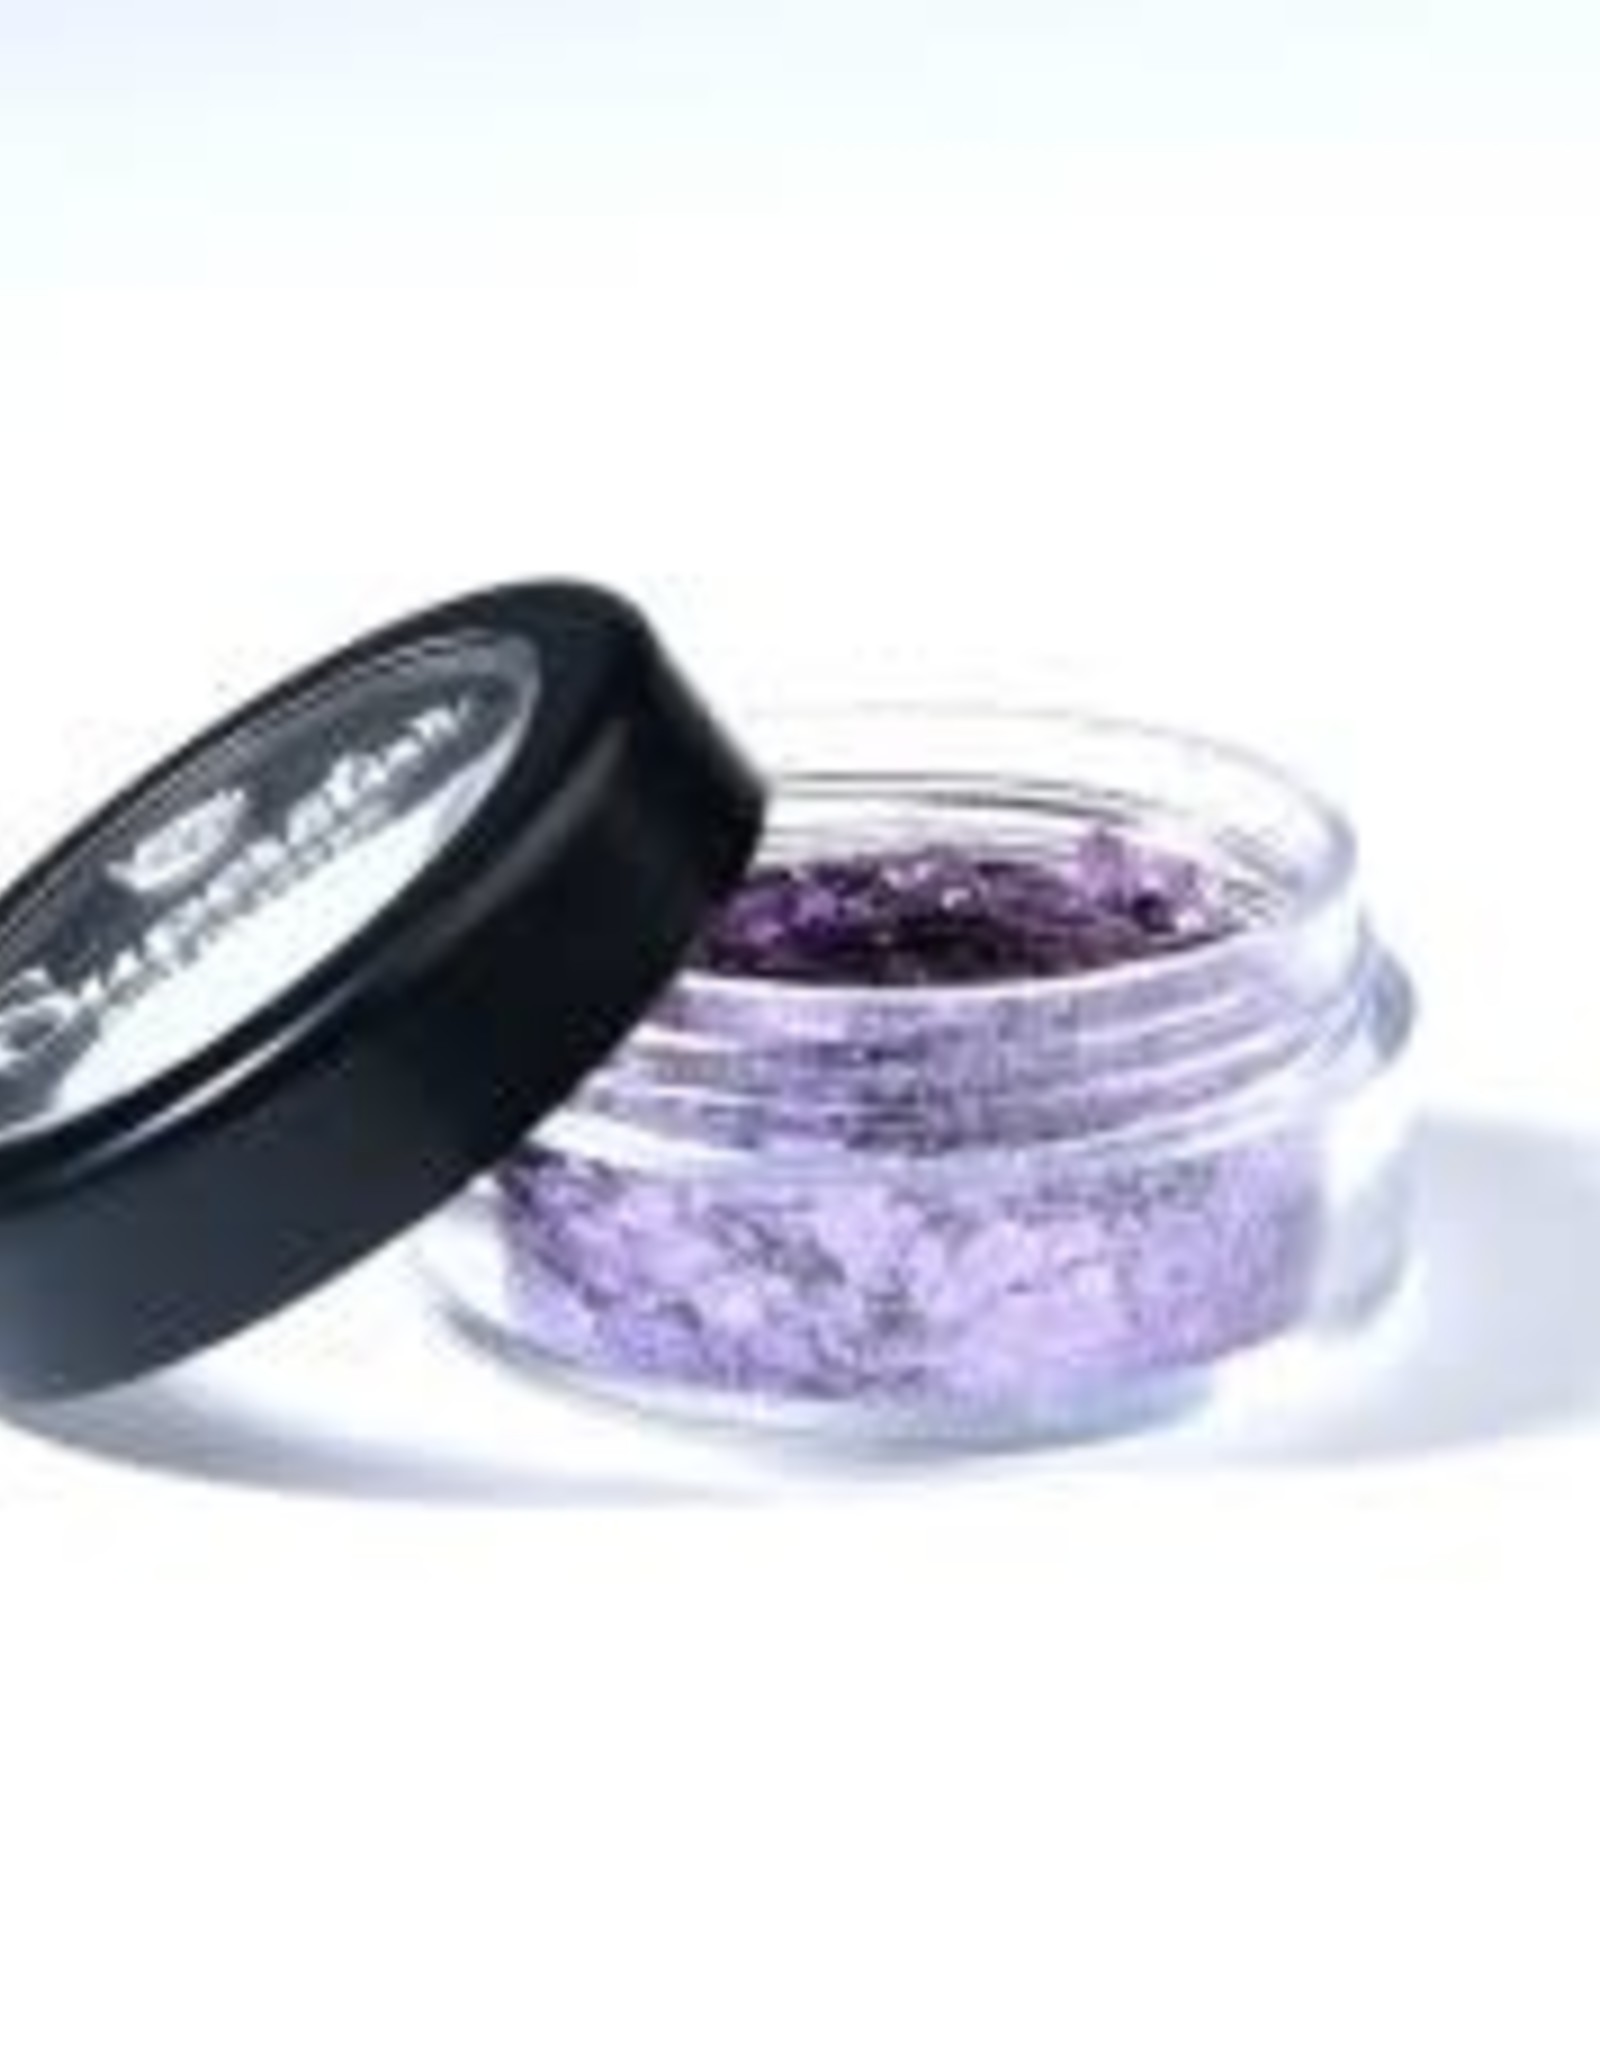 Superstar Violet Chunky mix Biodegradable Face- and Body Glitter